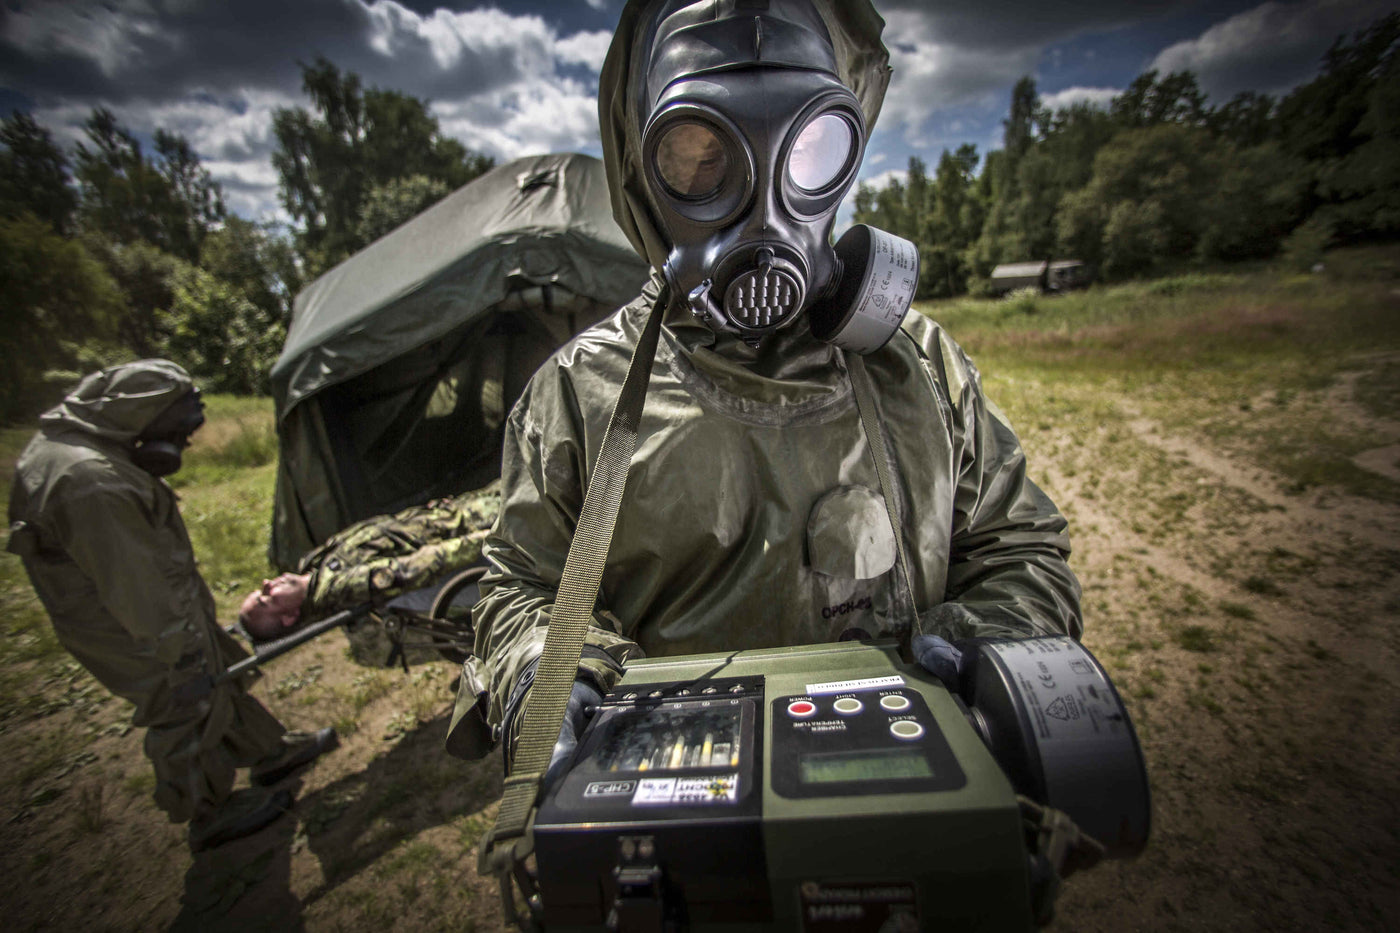 Solider testing air samples while wearing the CM-7M nuclear gas mask